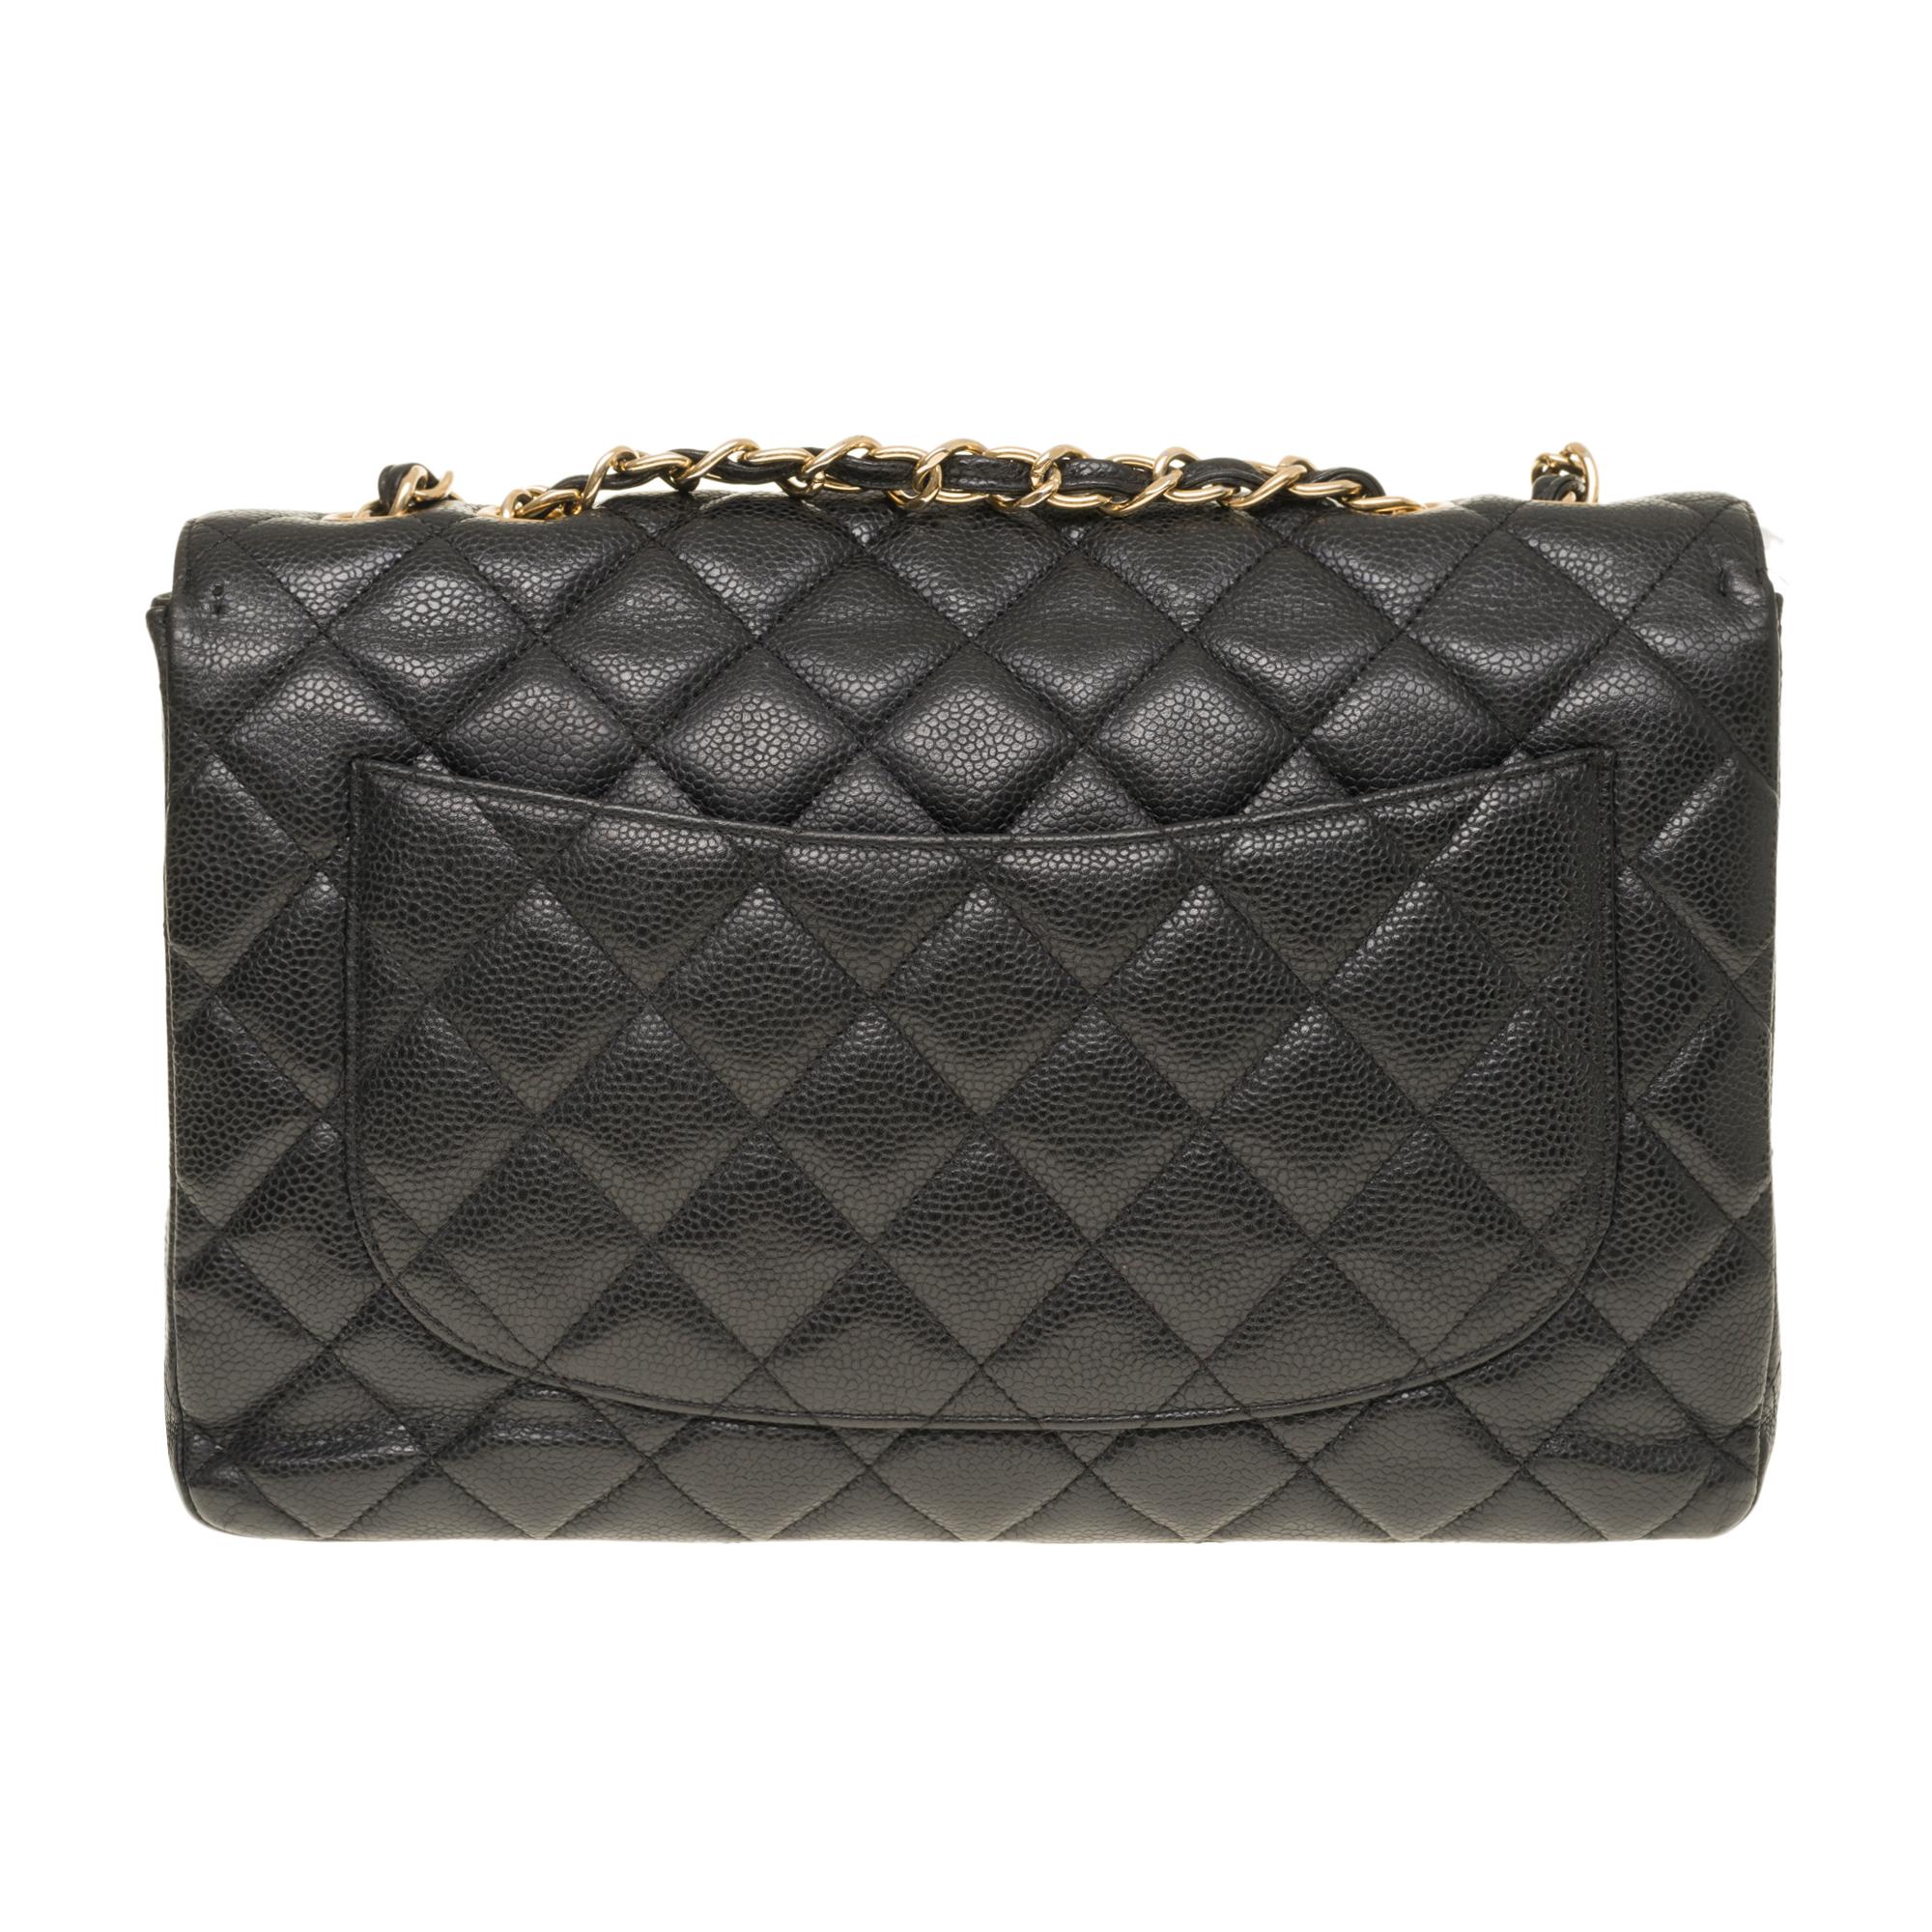 The Majestic Shoulder Bag Chanel Timeless Jumbo Flap bag in black quilted grained leather, gold-tone metal hardware, gold-tone metal chain handle intertwined with black leather allowing a hand or shoulder or shoulder strap

Gilded metal logo closure